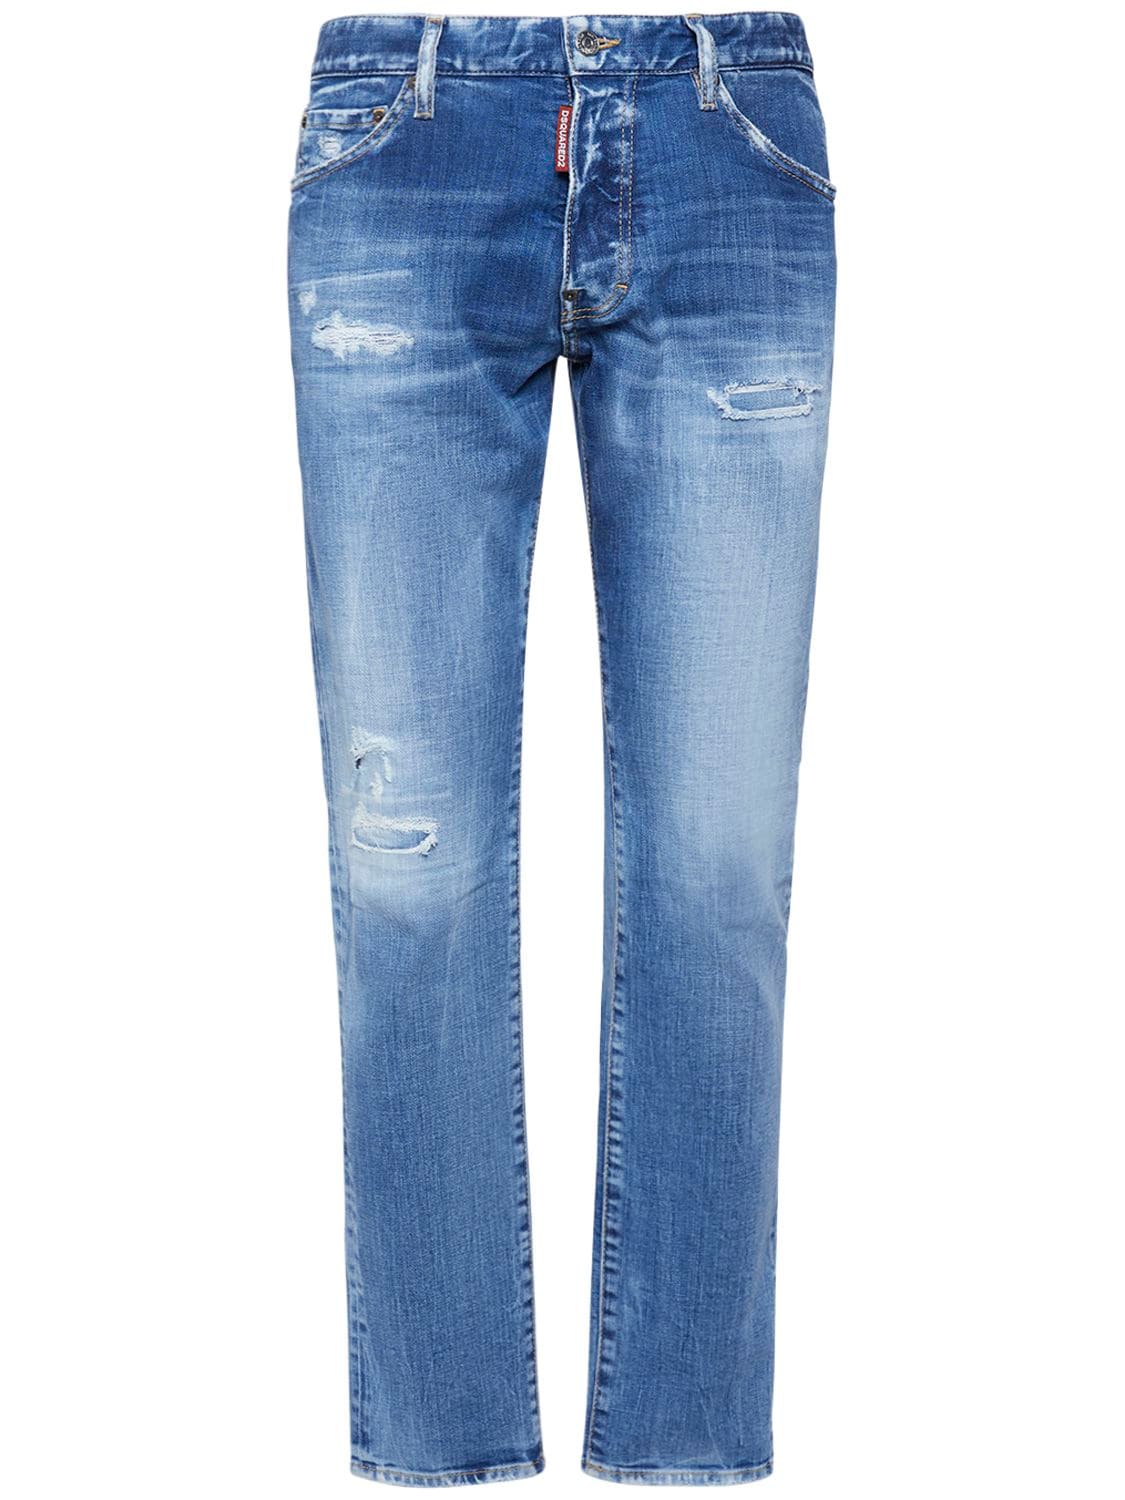 Image of Cool Guy Stretch Cotton Denim Jeans